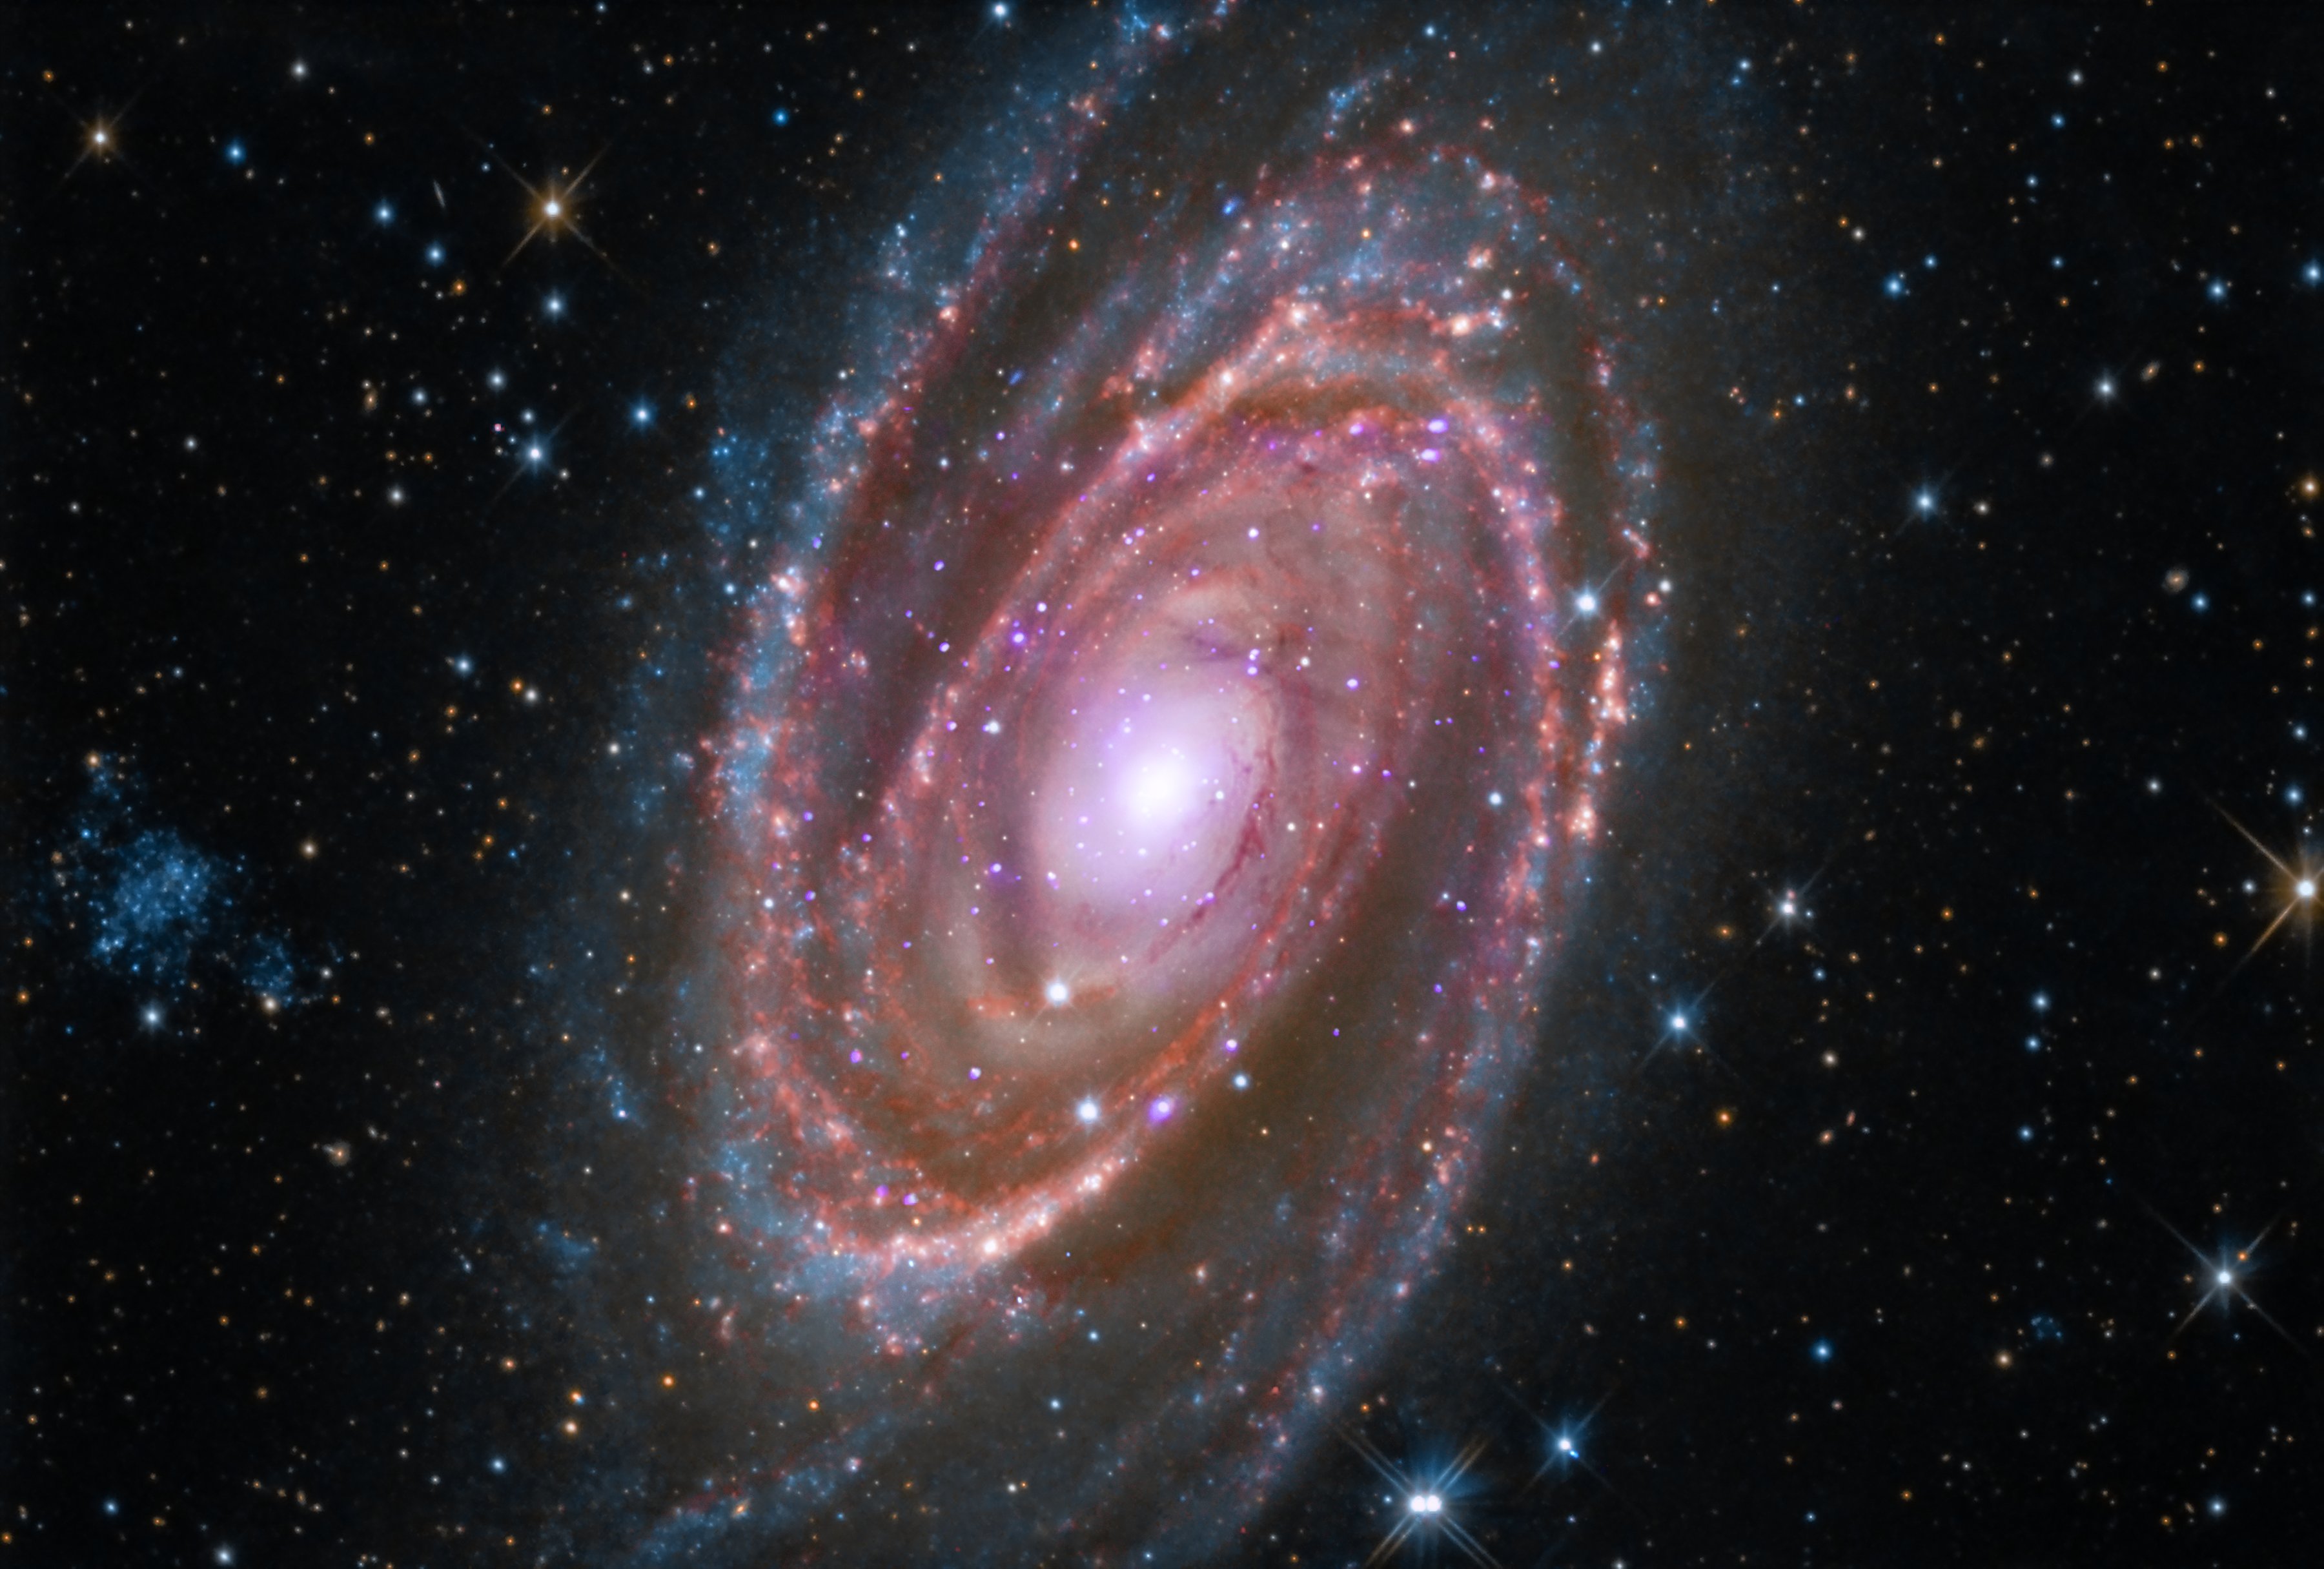 The spiral galaxy M81 is located about 12 million light-years from Earth.